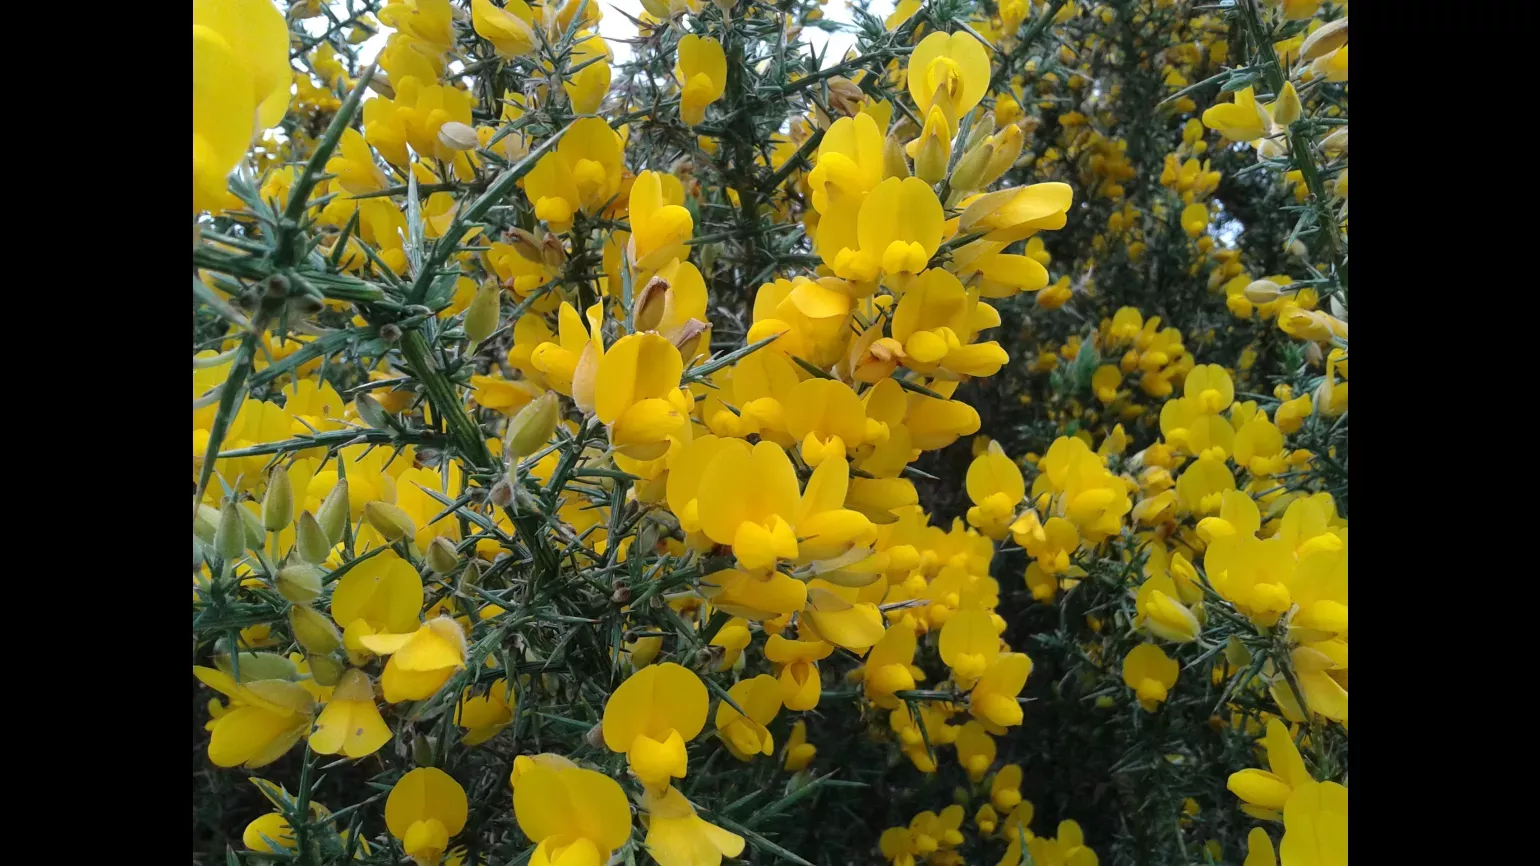 A thorny bush is covered in yellow flowers